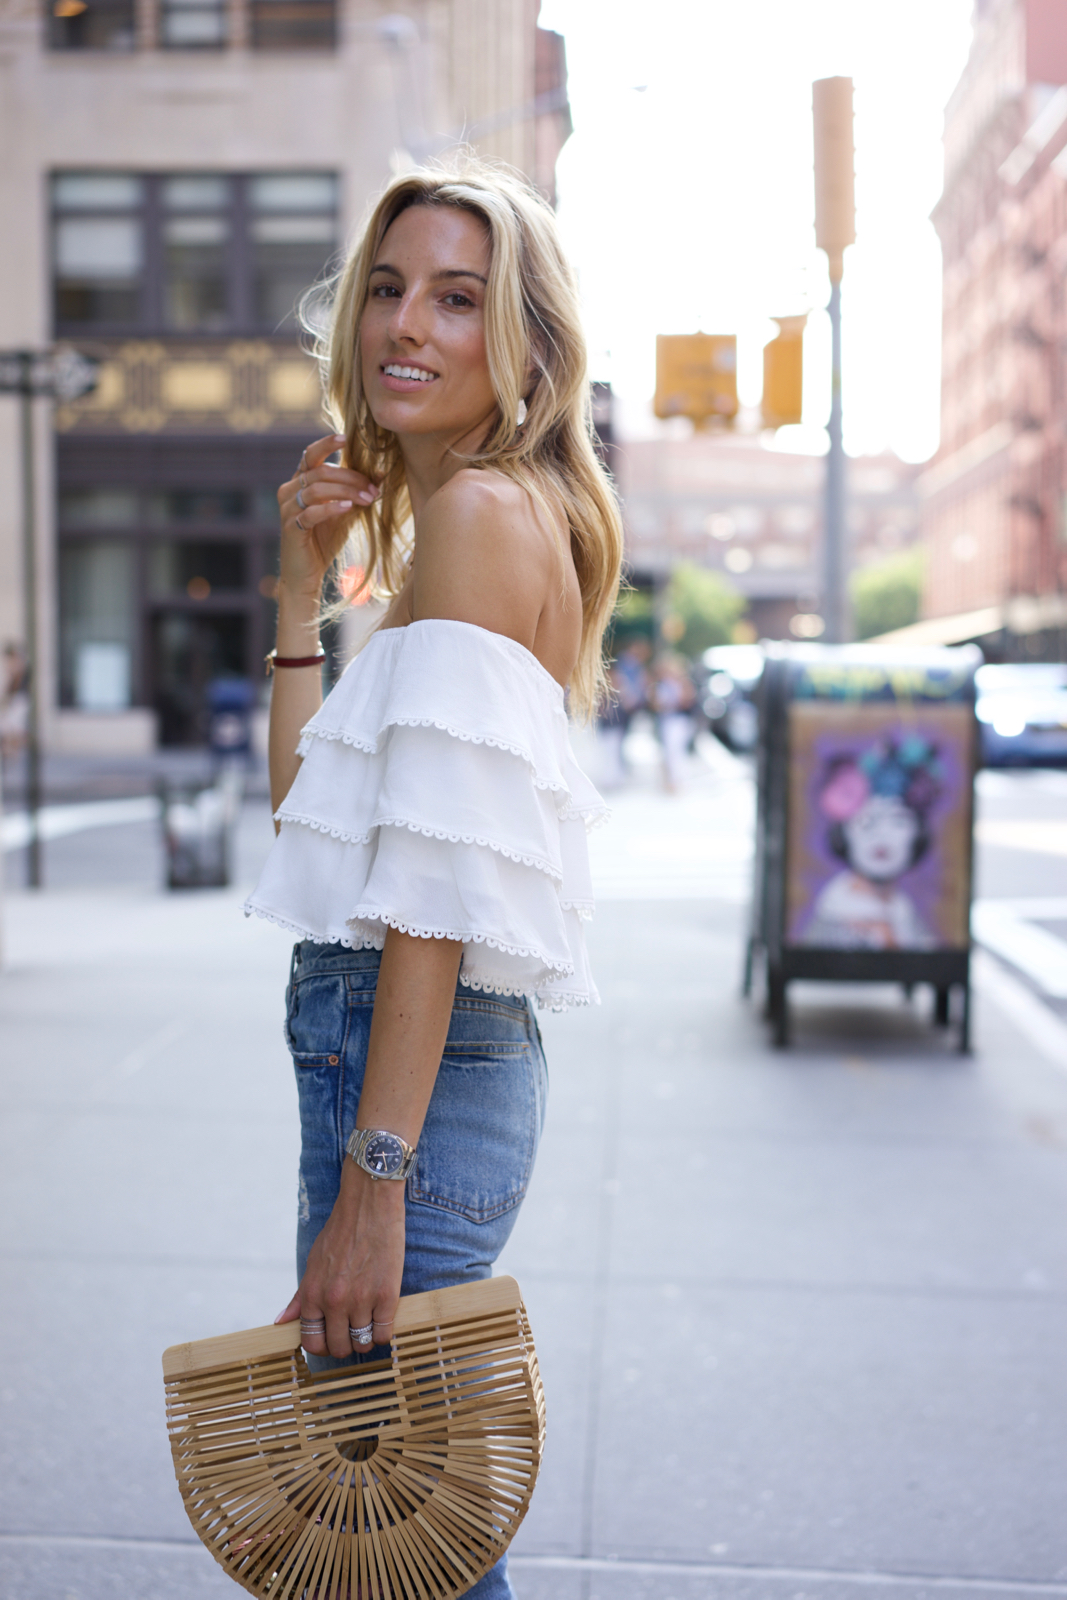 Off the Shoulder top, Ripped Jeans & a Pop of Pink in Nolita - Lisa D ...